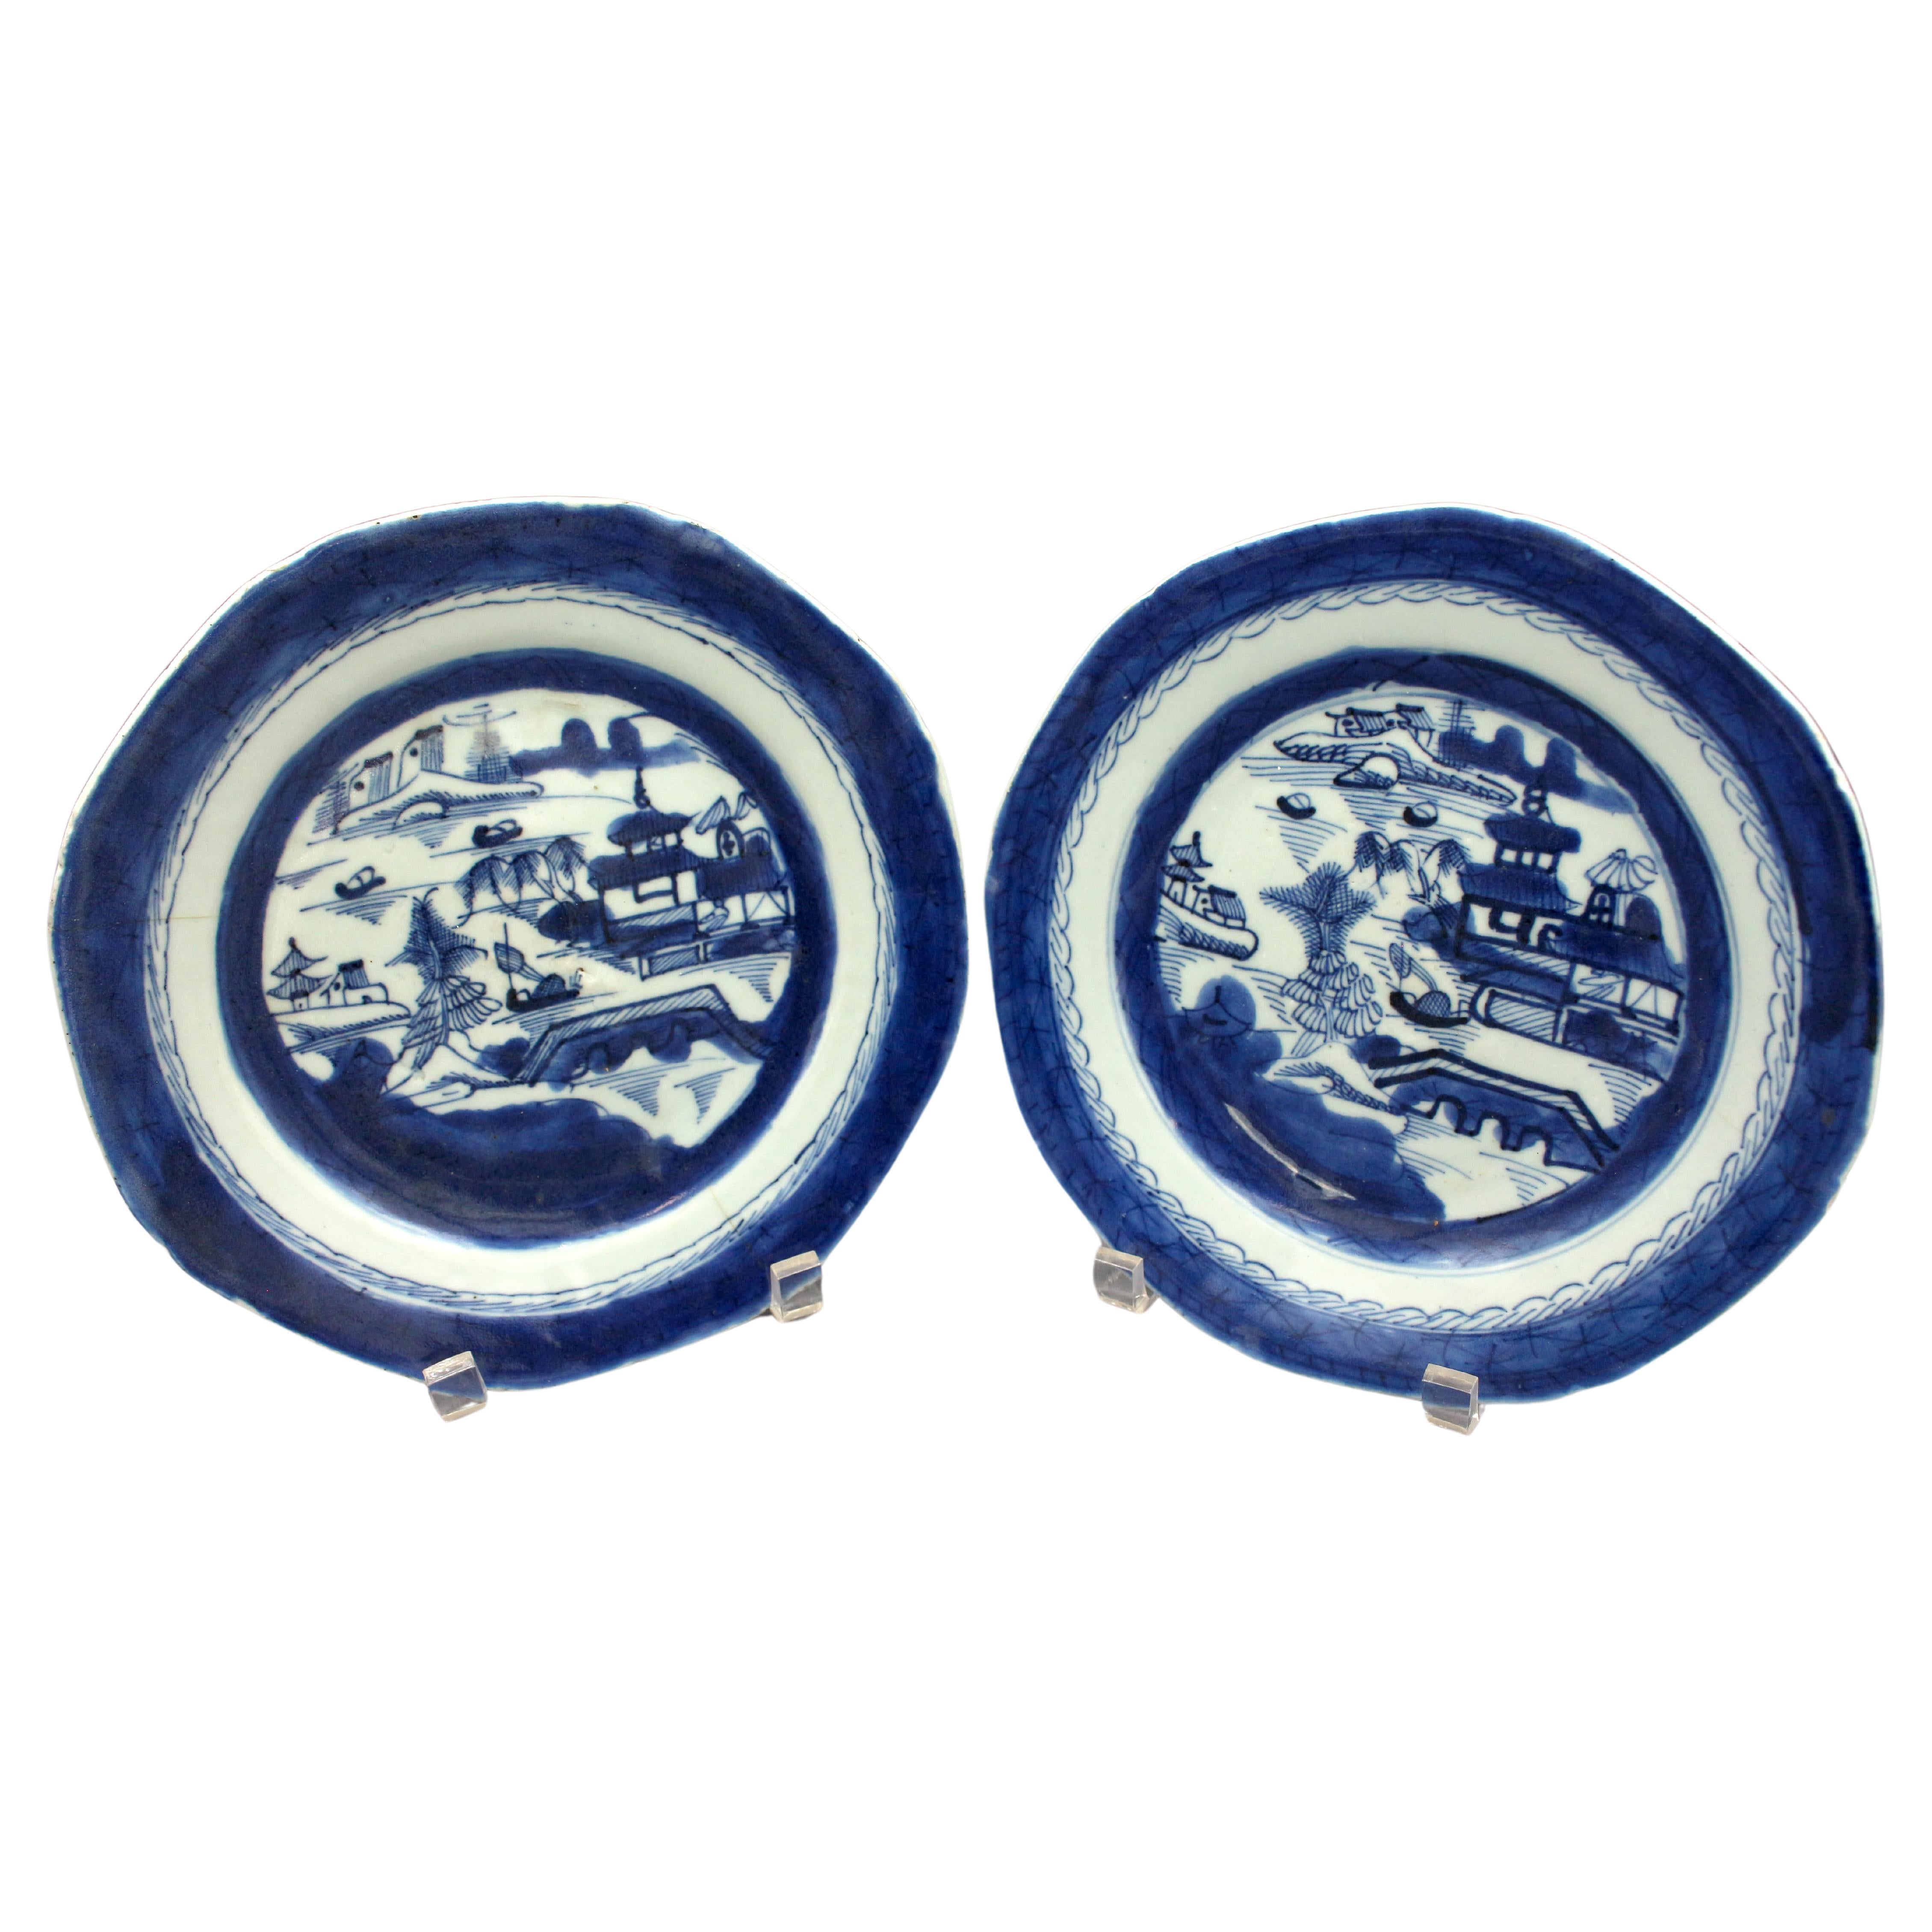 Circa 1830 Pair of Blue Canton Porcelain Salad Plates, Chinese Export